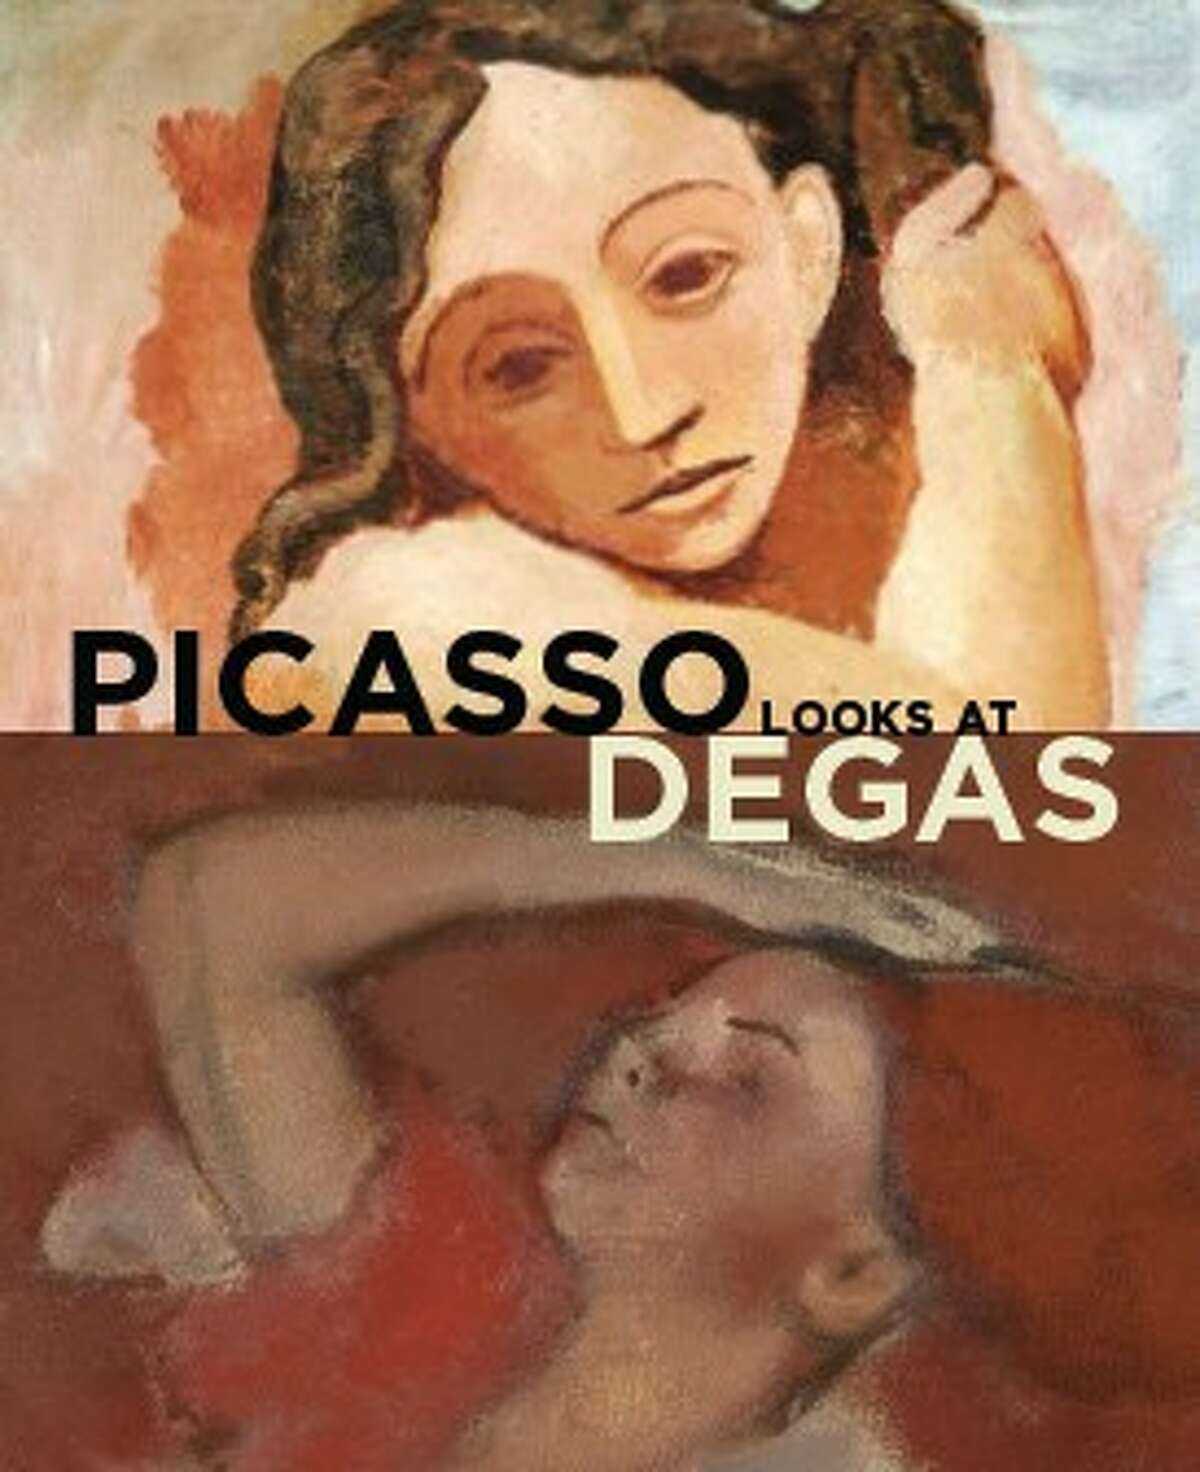 Picasso Looks at Degas By Elizabeth Cowling and Richard Kendall With additional contributions by Cecile Godefroy, Sarah Lees, and Montse Torras